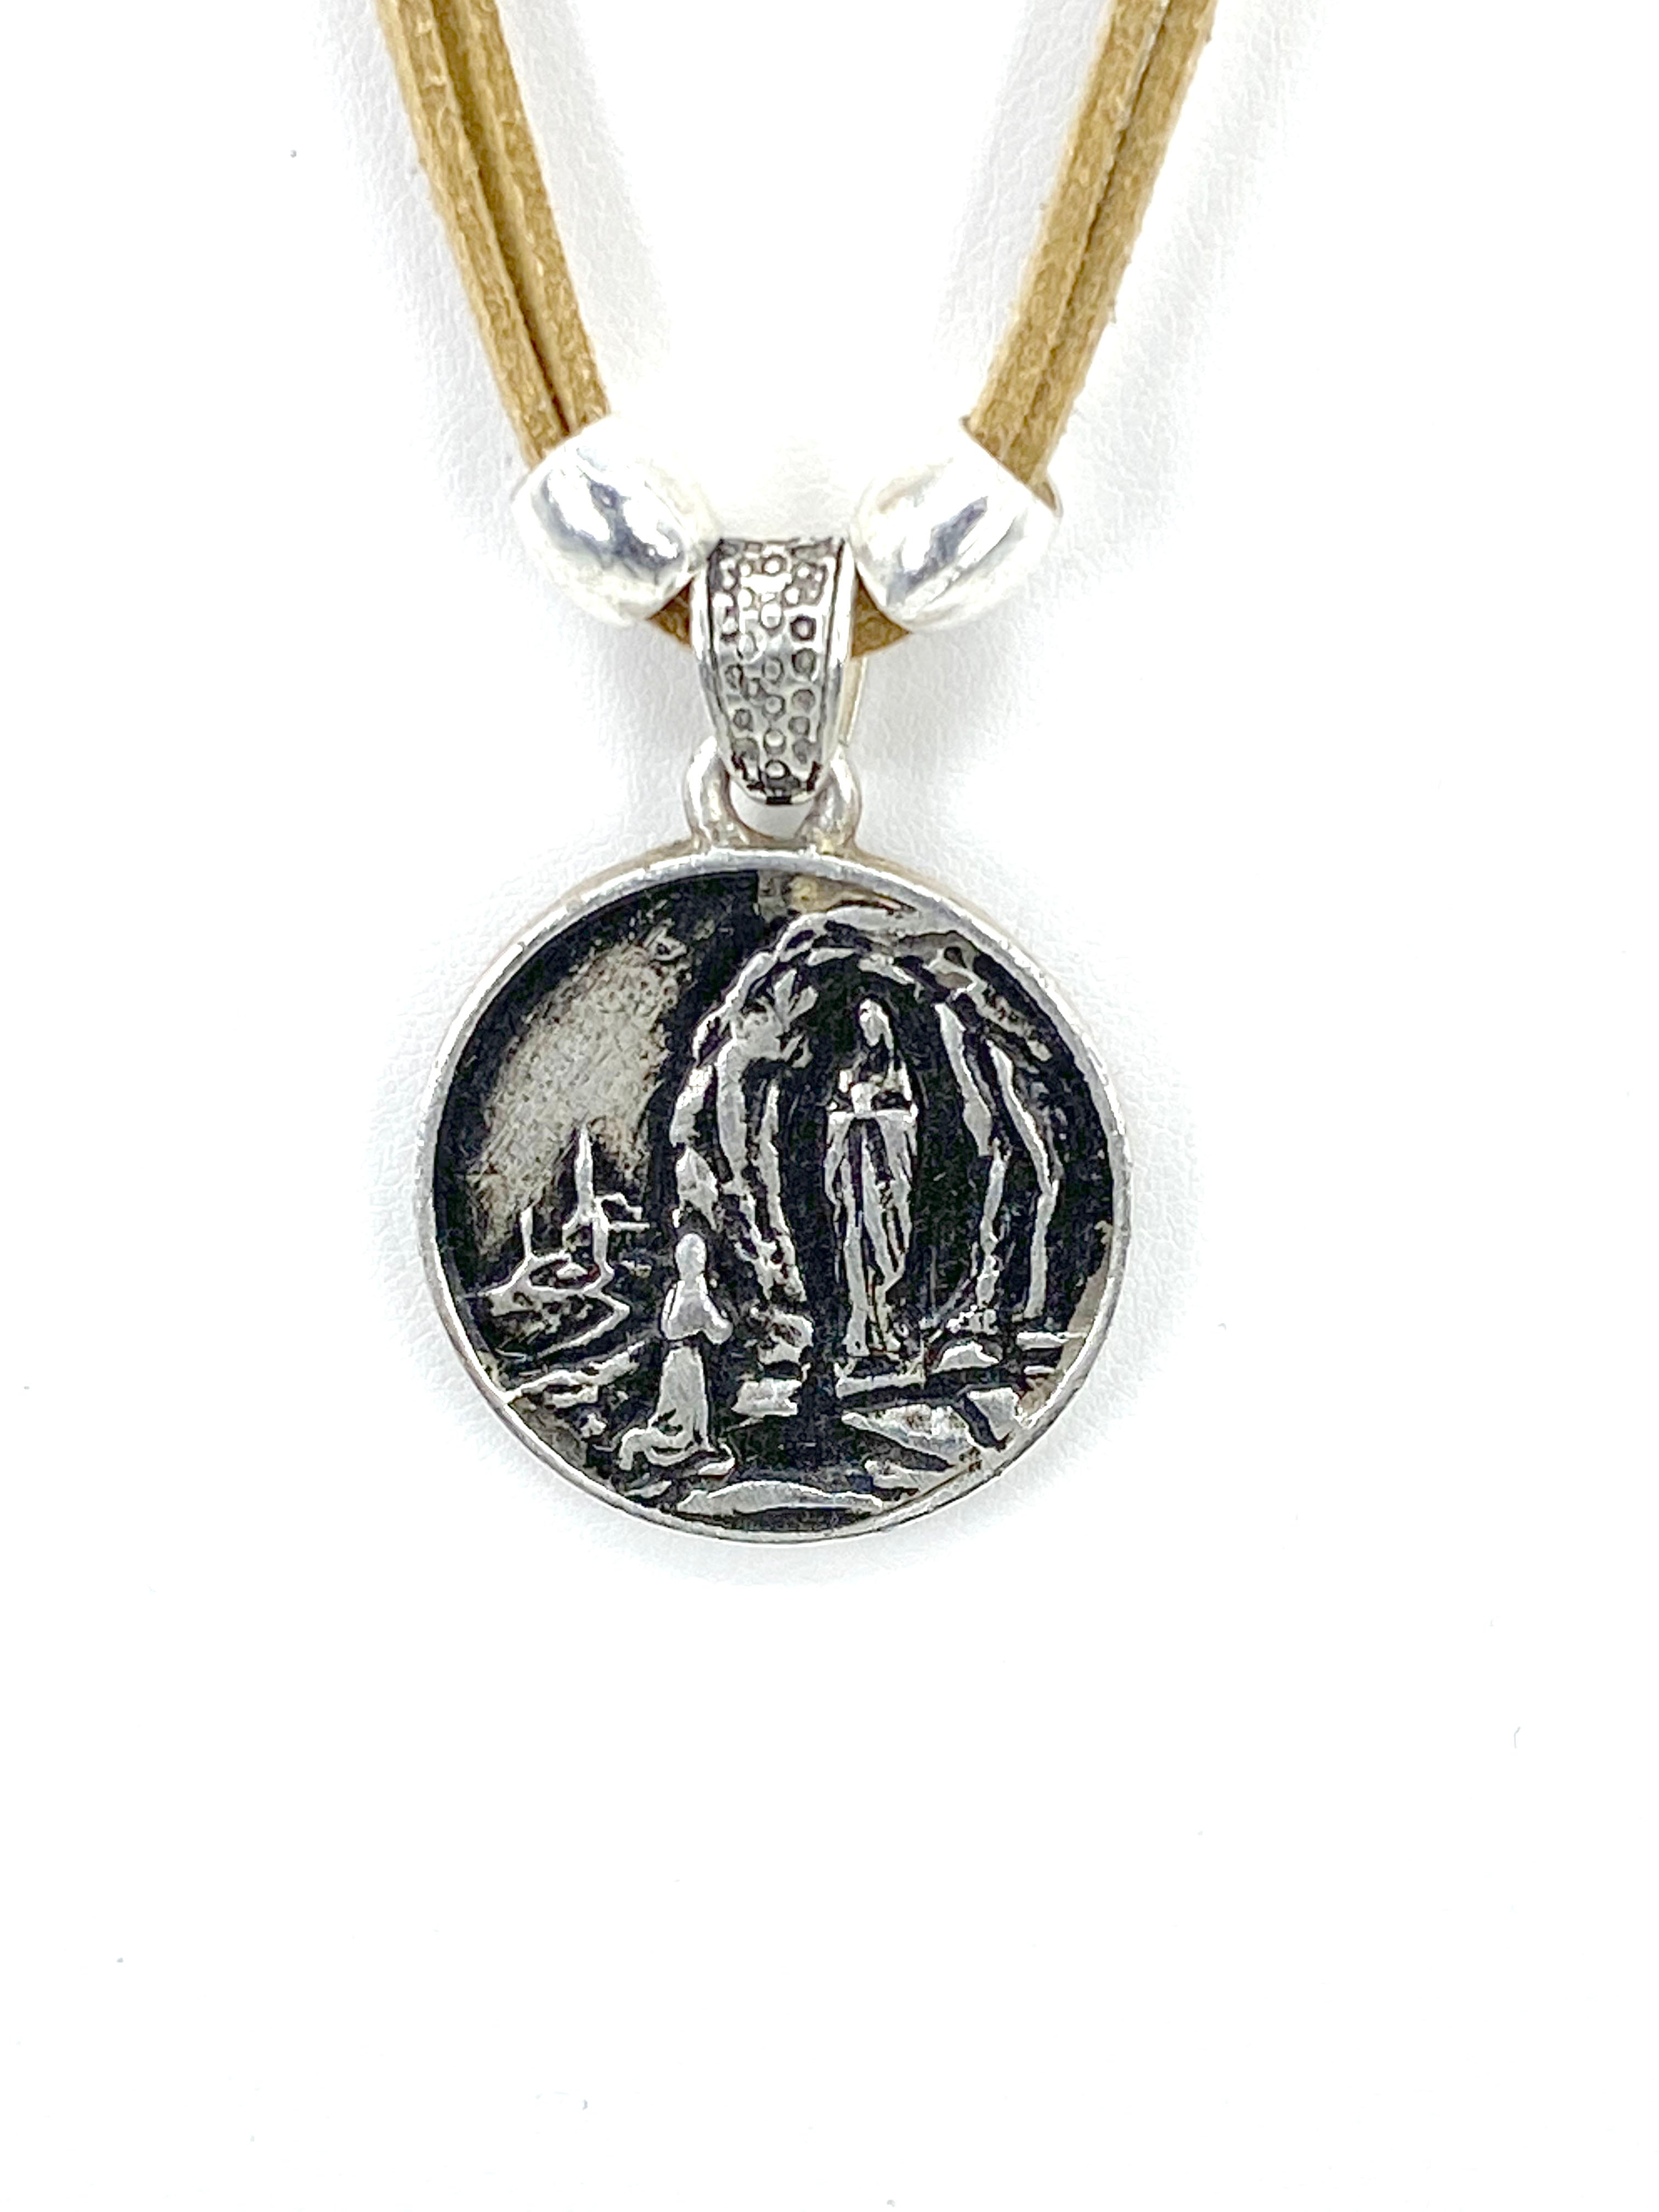 Vintage Necklace of Our Lady Of Lourdes Jewelry with Genuine Leather strap by Graciela's Collection